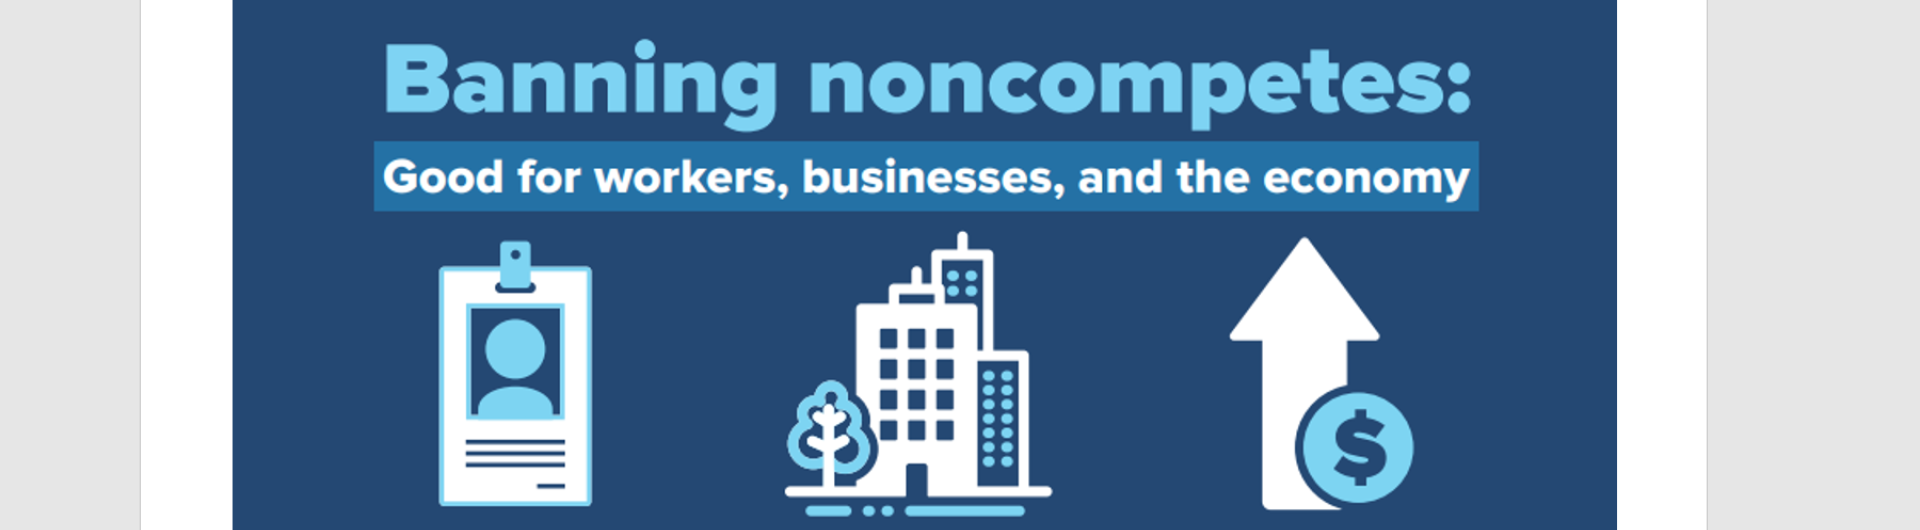 Banning noncompetes good fo workers businesses and the economy